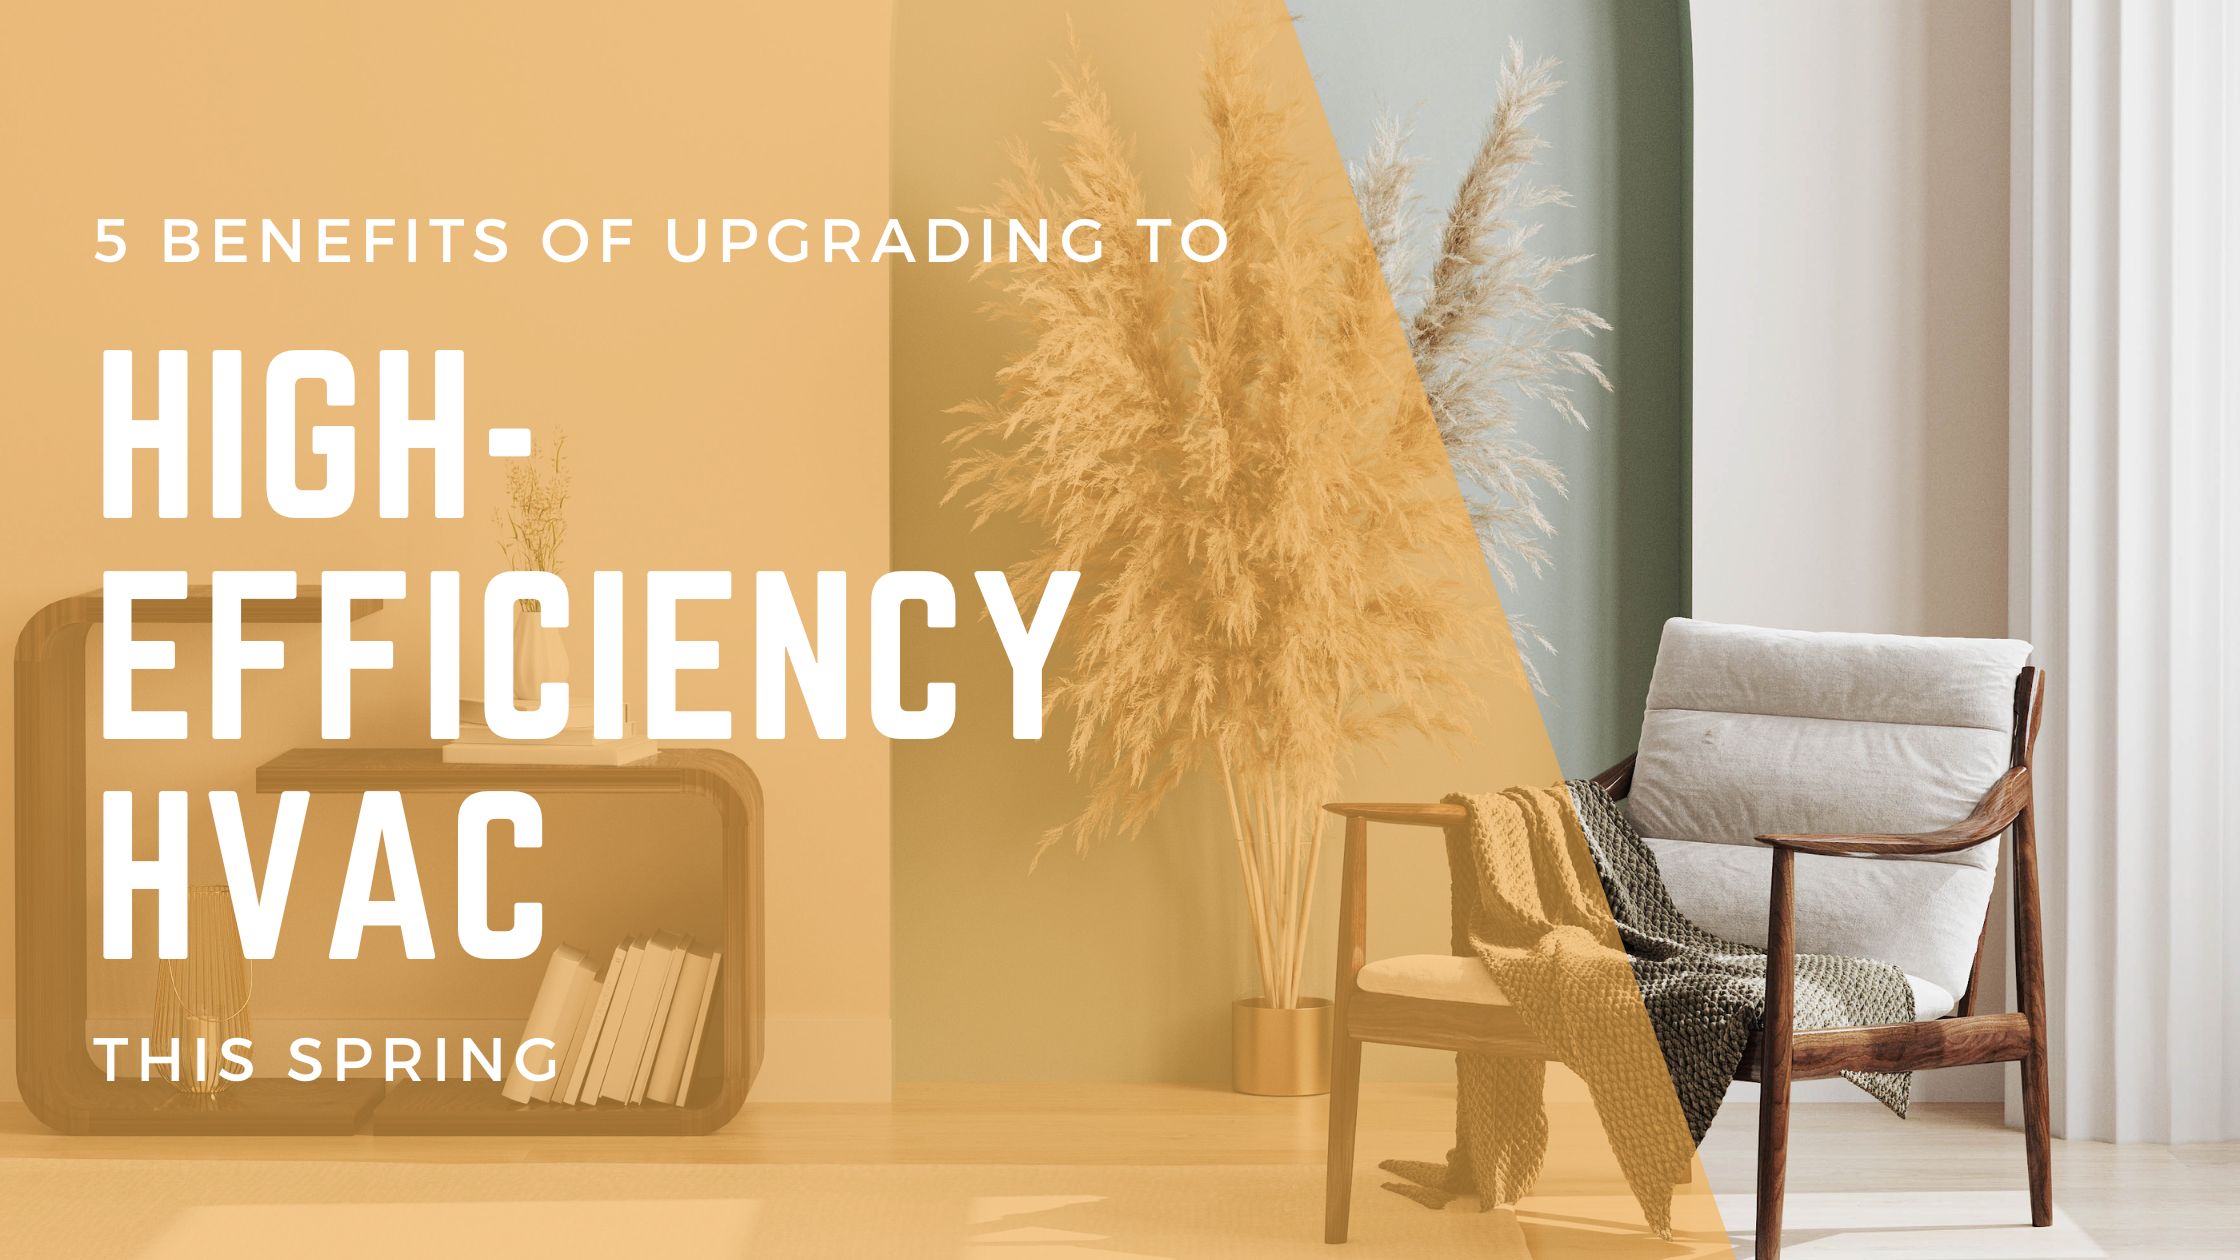 5 Benefits of Upgrading to High-Efficiency HVAC This Spring